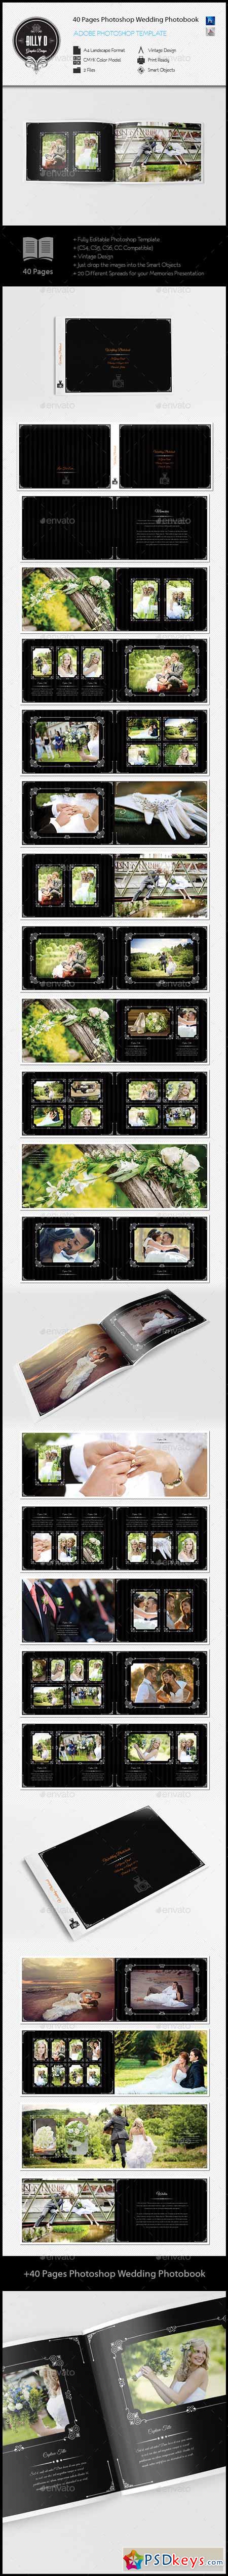 40 Pages Photoshop Wedding Photobook Template 8661523